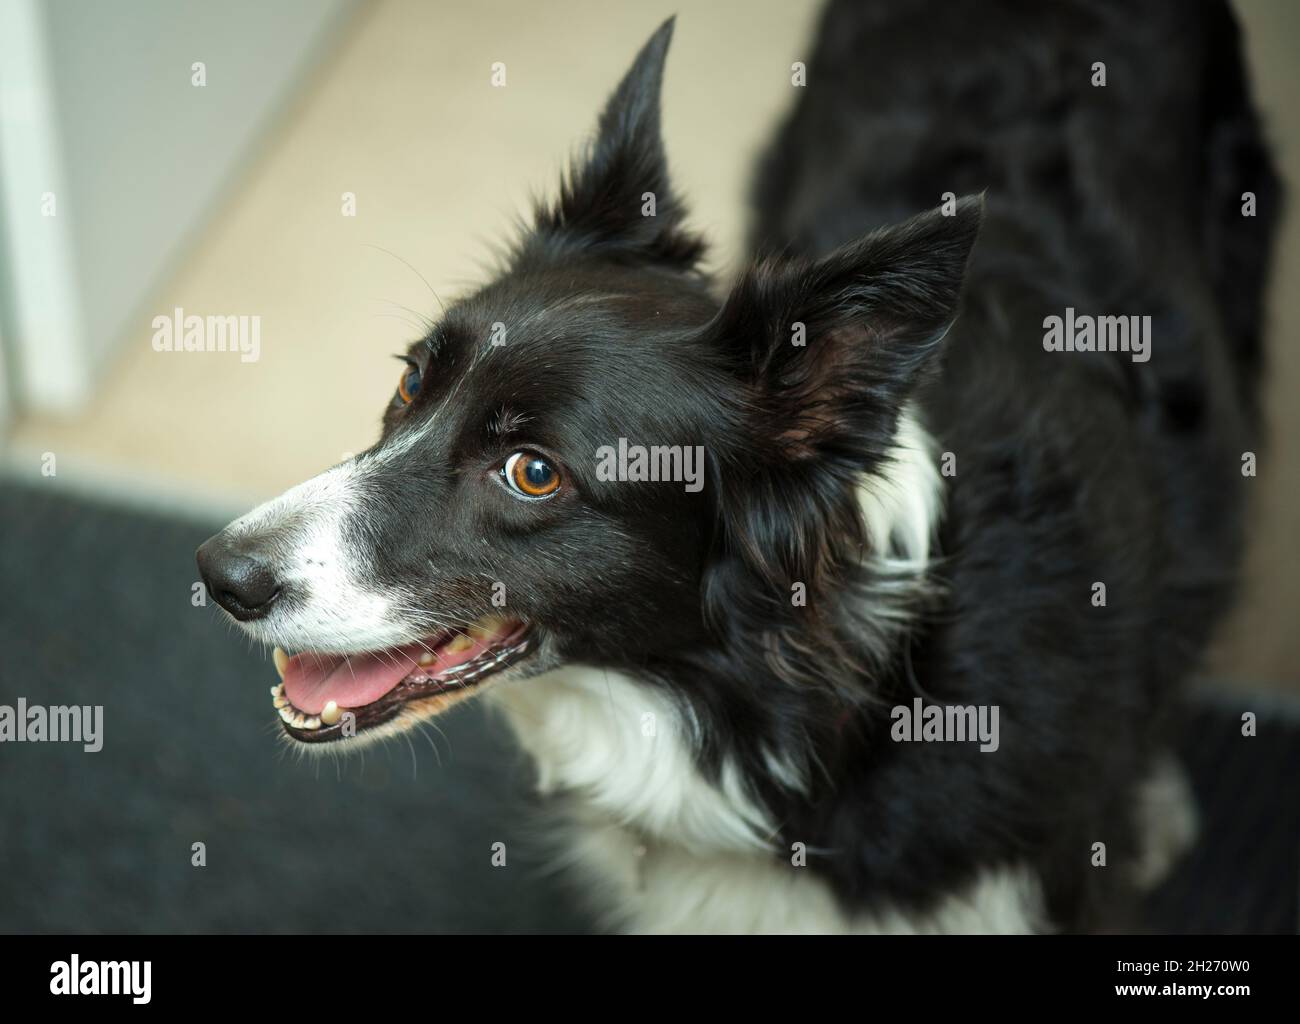 long haired border collie dog smiling Stock Photo